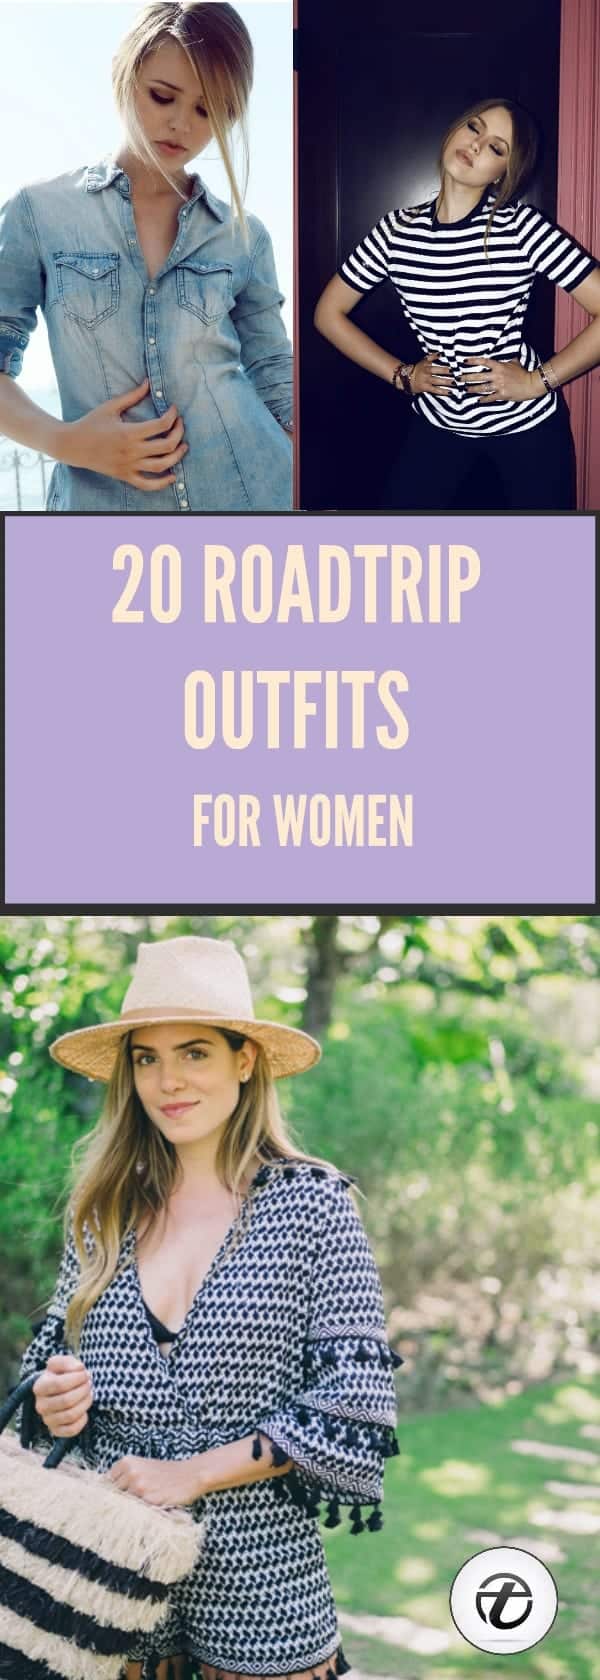 Women Road Trip Outfits- 20 Ideas How to Dress for Road Trip